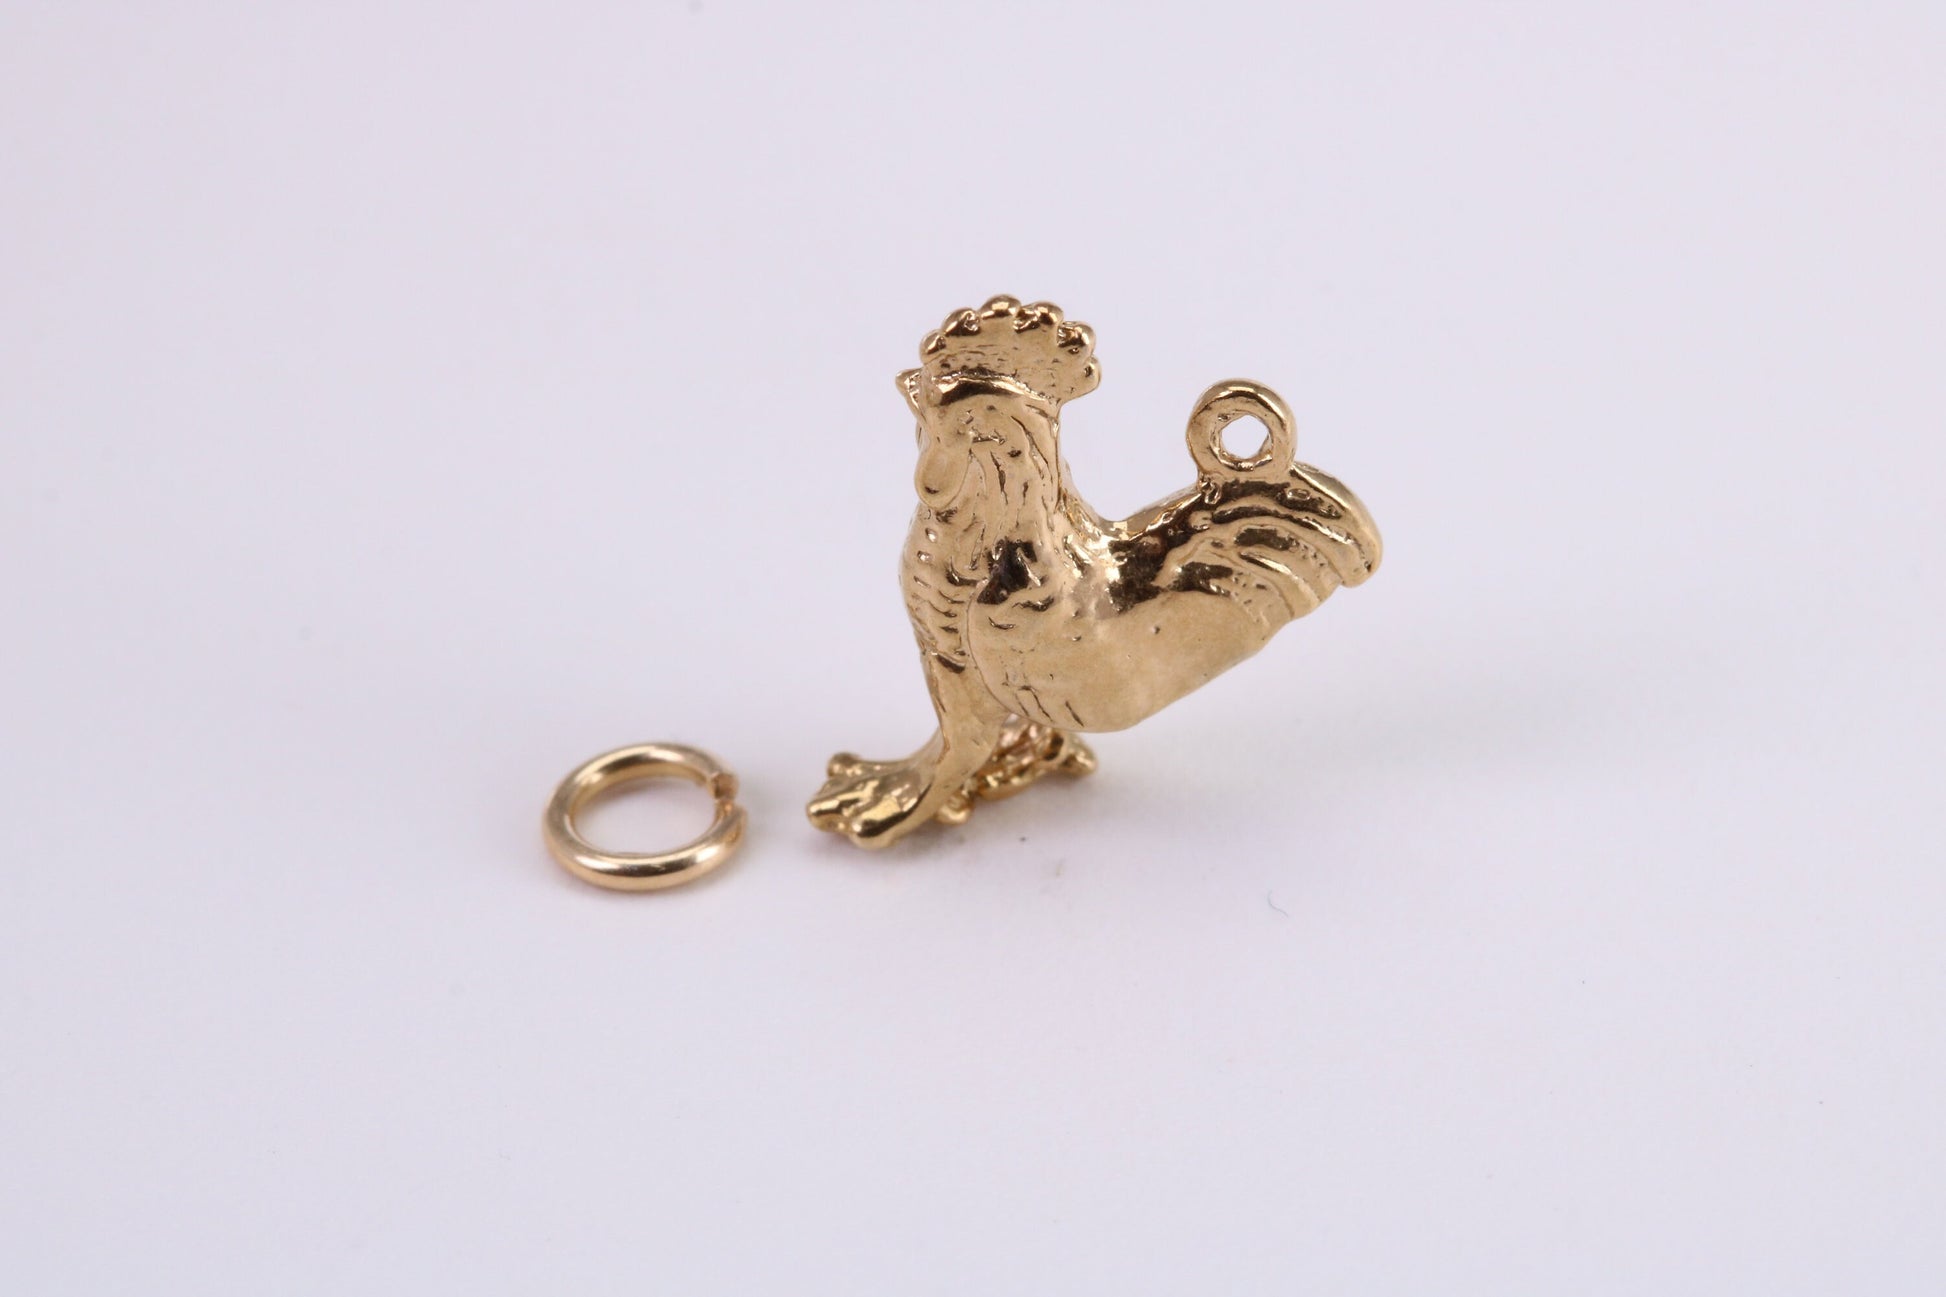 Cockerel Charm, Traditional Charm, Made from Solid Yellow Gold, British Hallmarked, Complete with Attachment Link